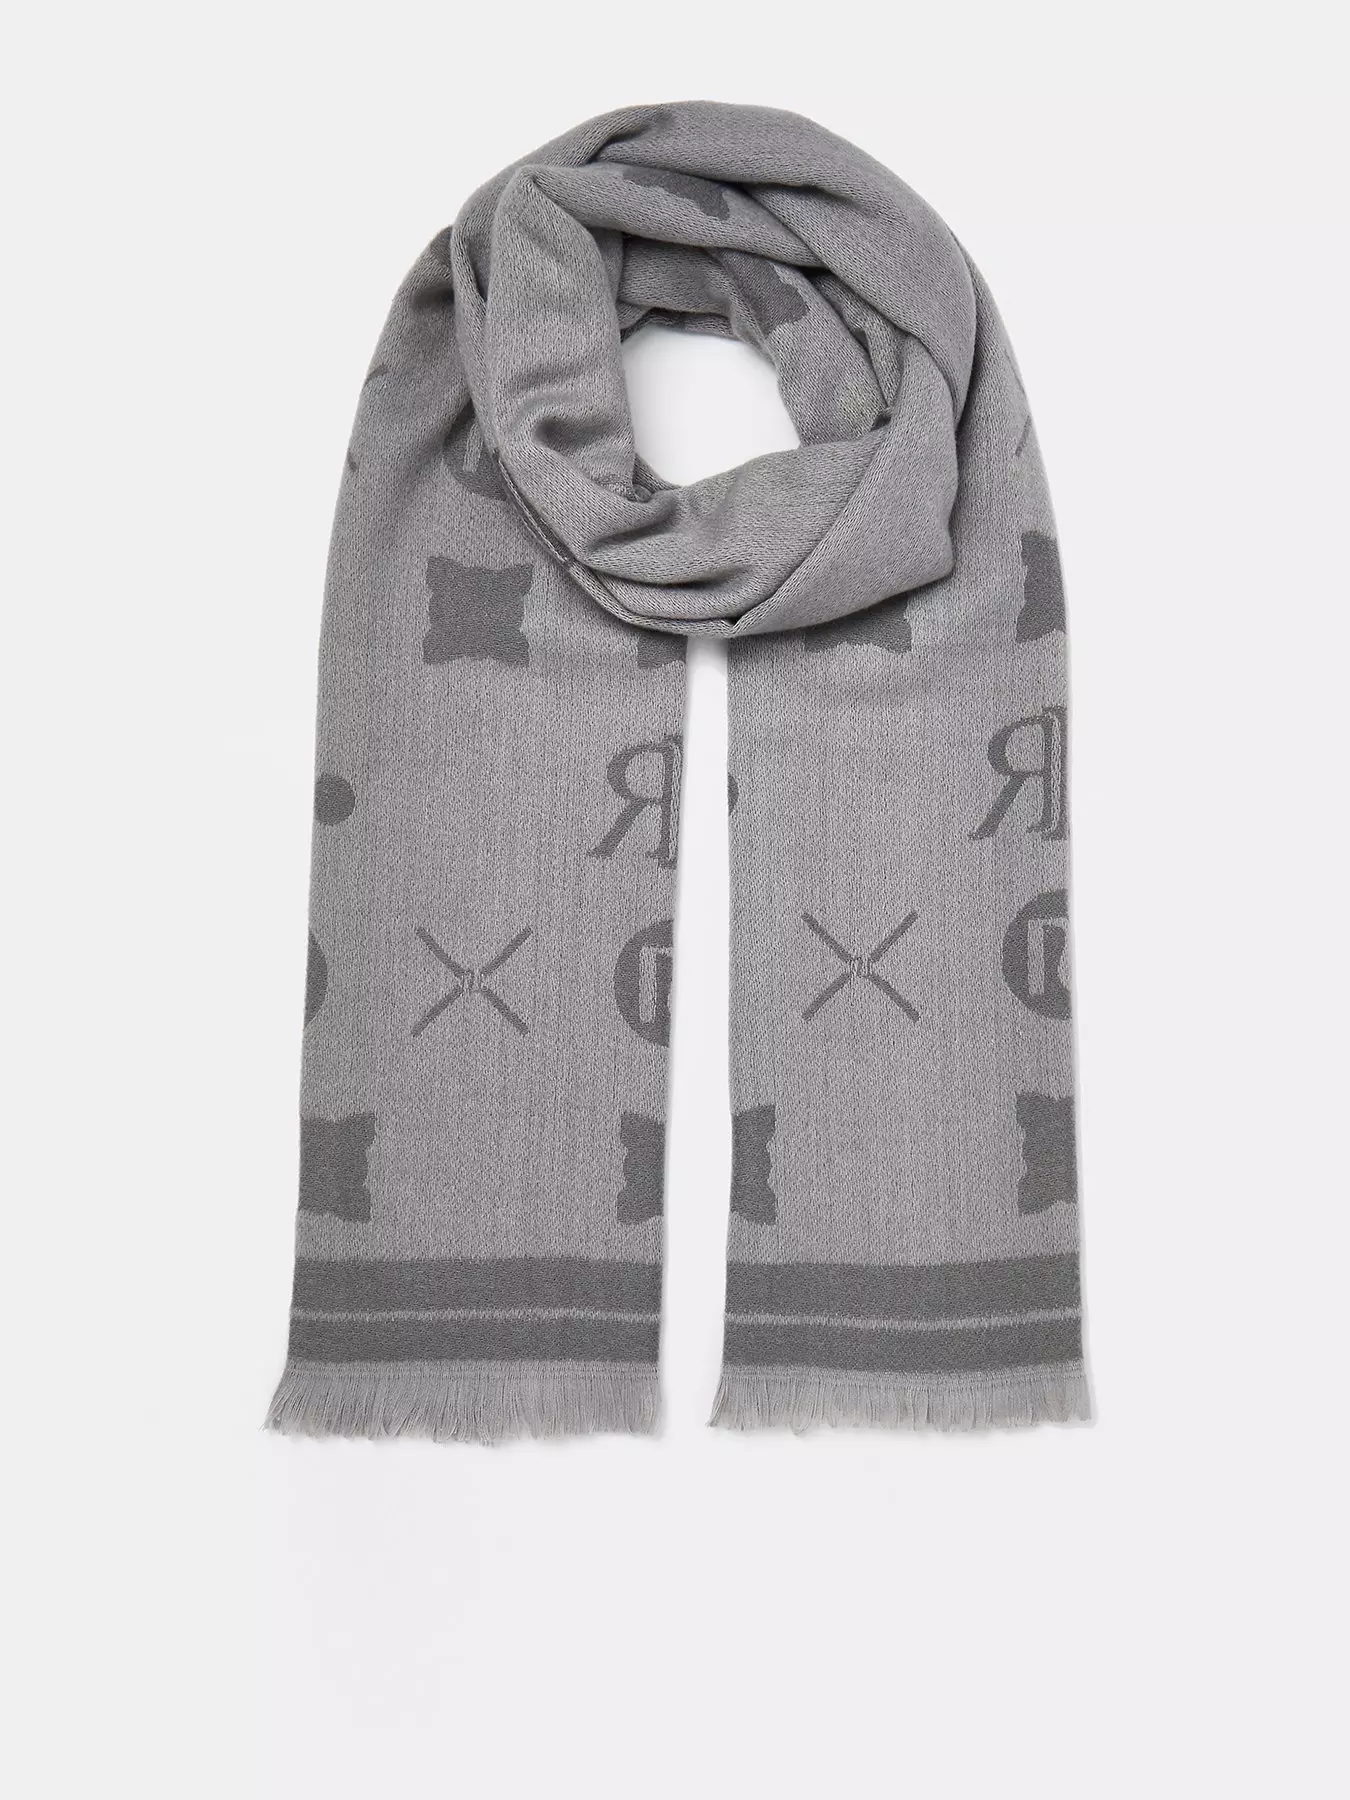 Louis Vuitton Lambswool LV Monogram Scarf - Grey Scarves and